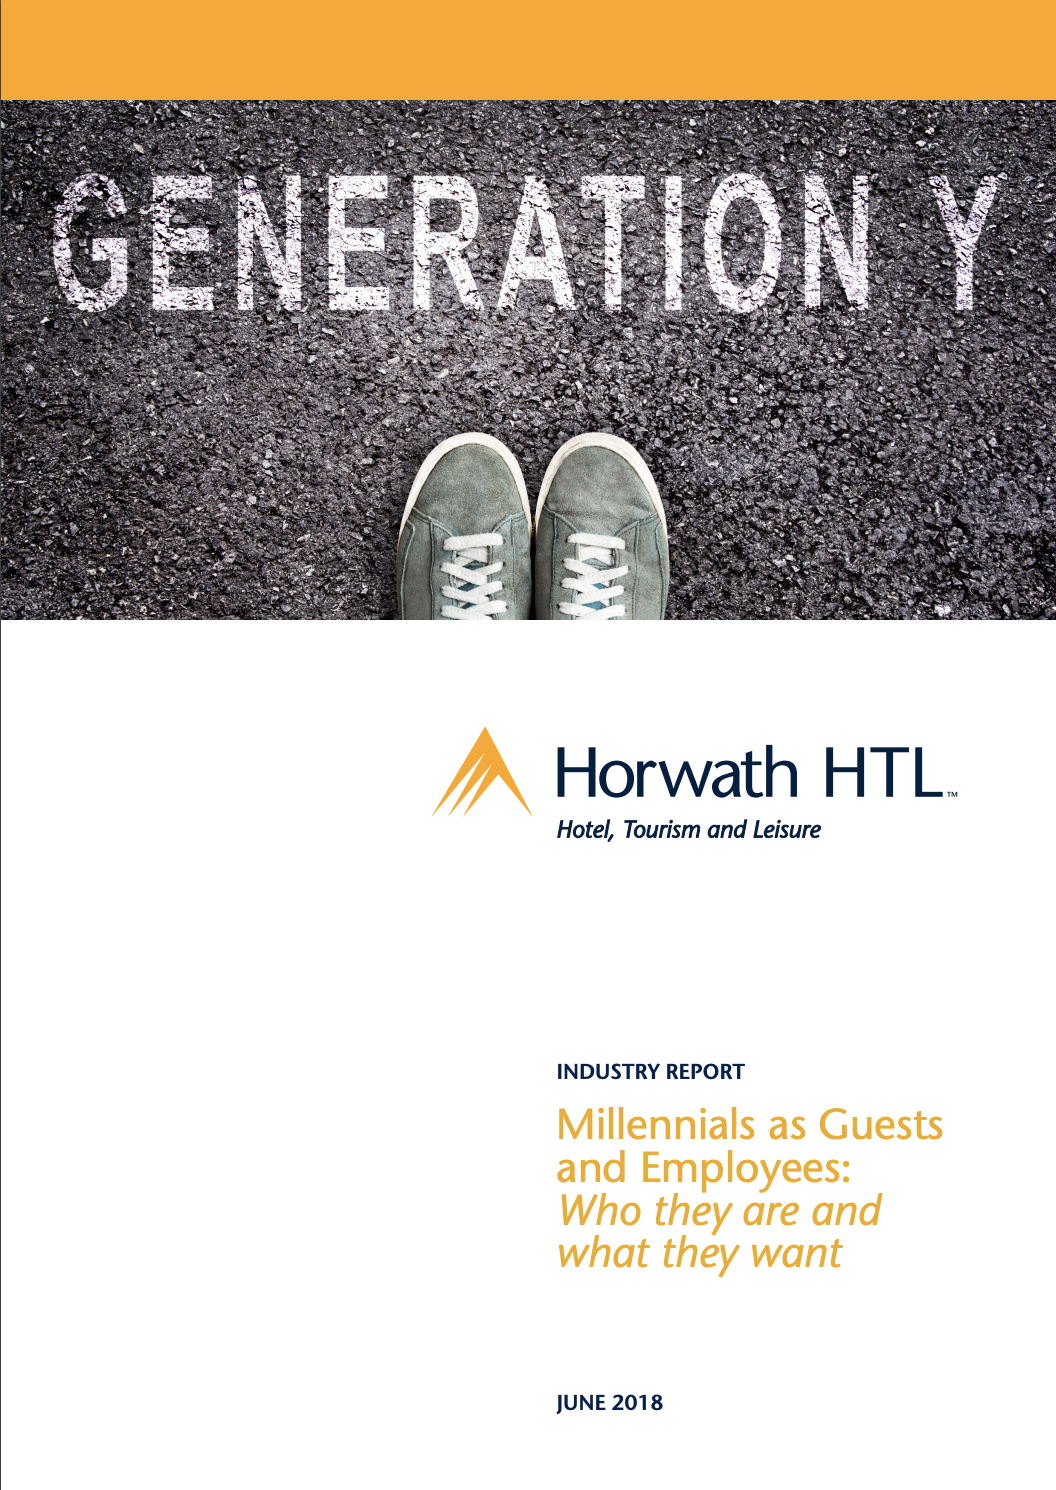 Industry Report: Millennials as Employees & Guests